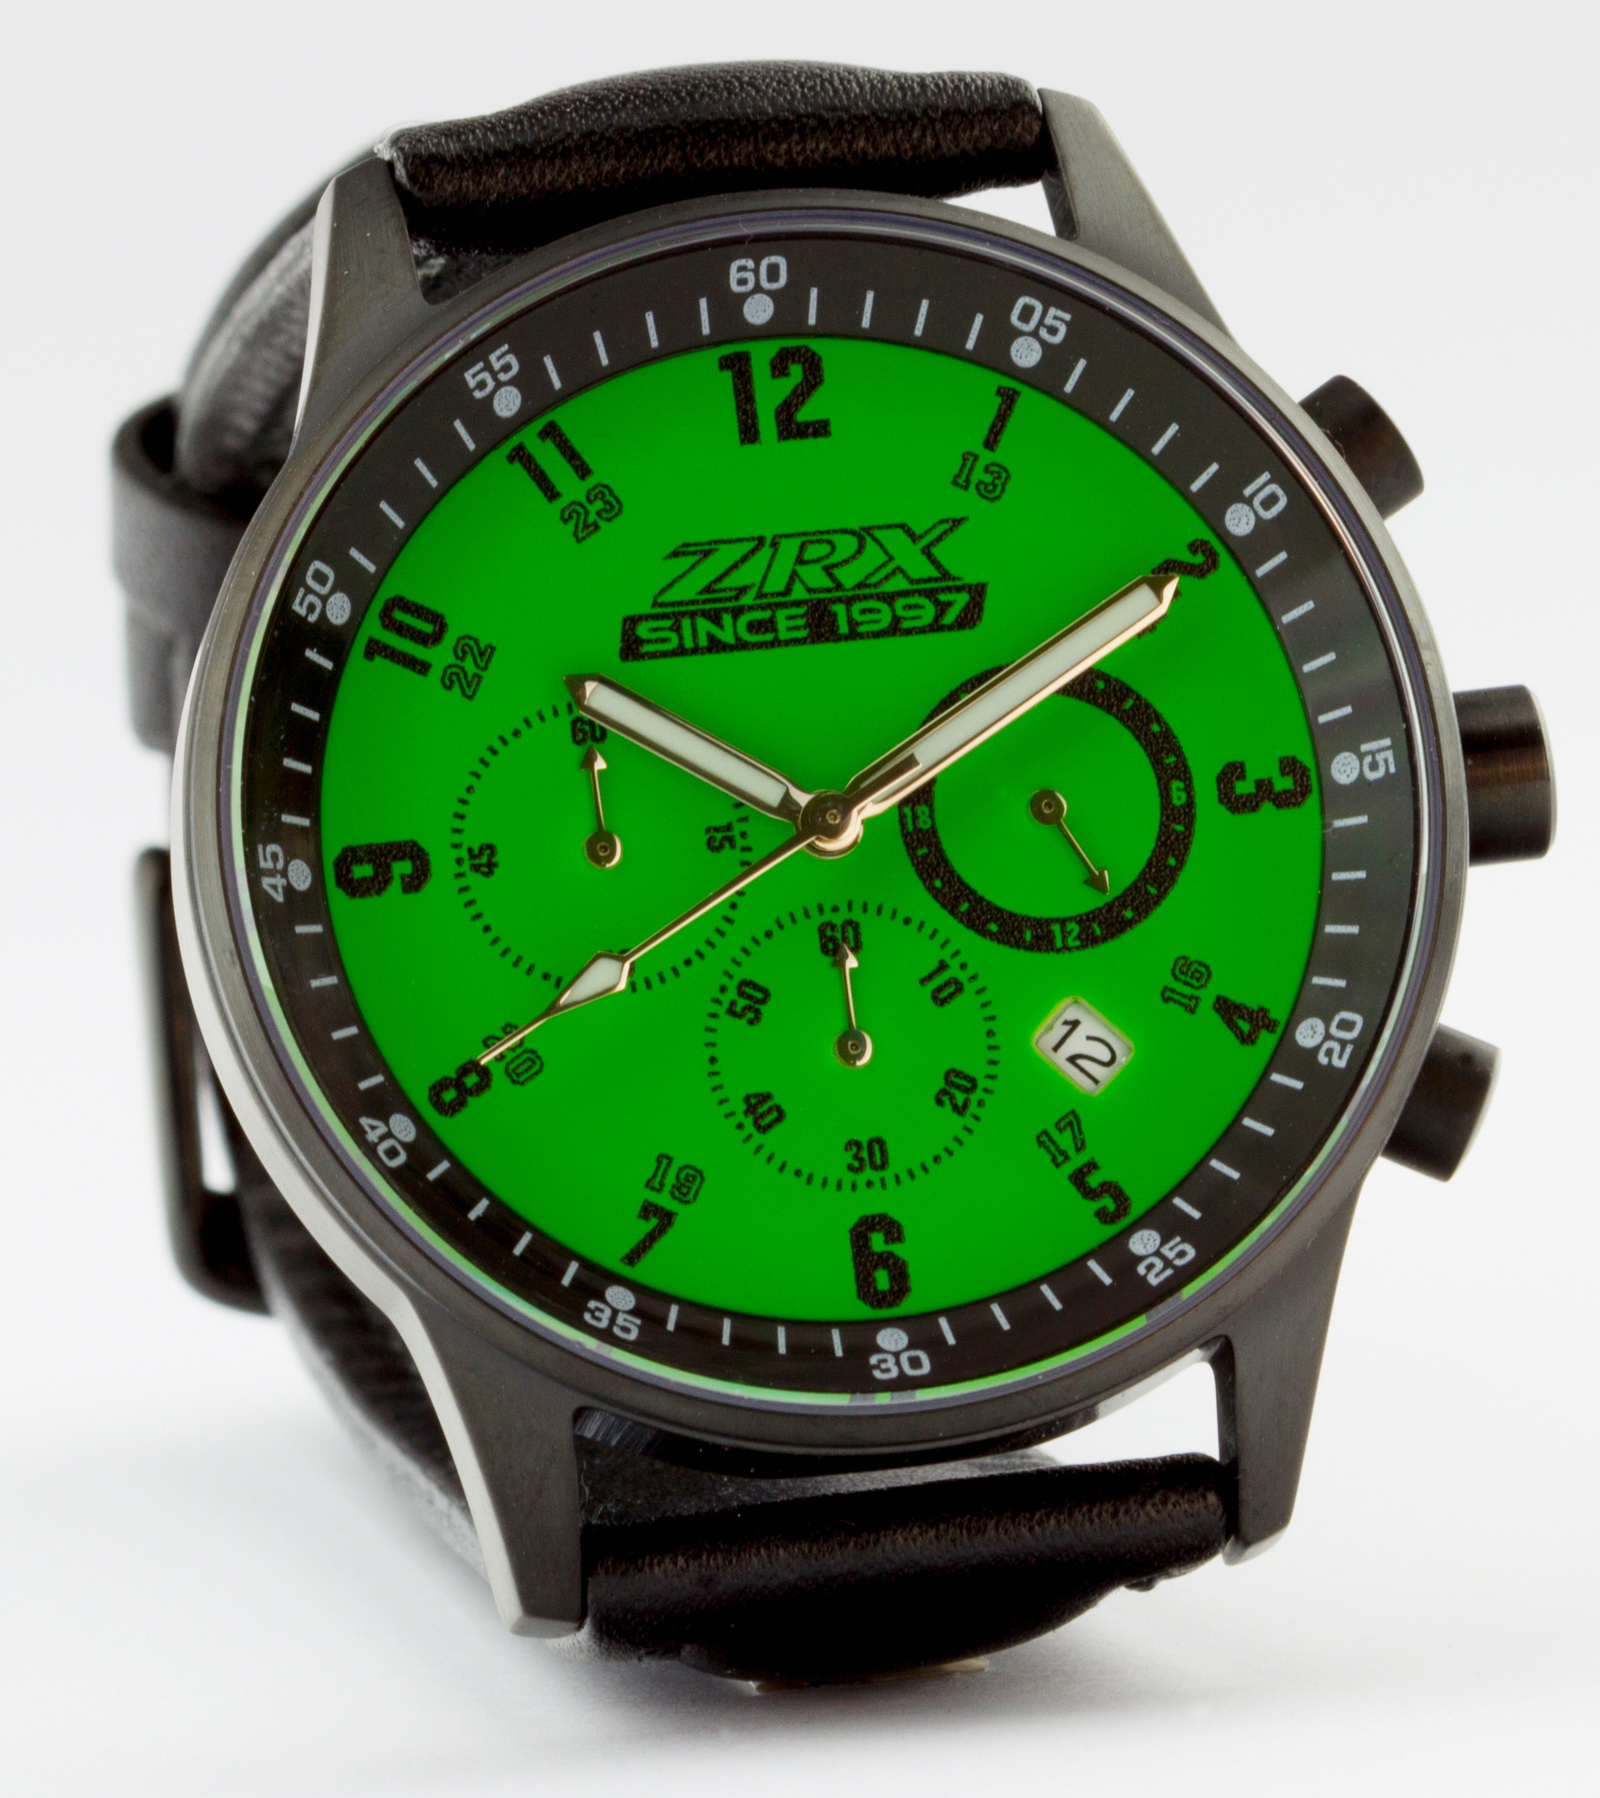 New Kawasaki Chronograph Wristwatch since 1997” - €149 (RM703) - Motorcycle news, Motorcycle reviews from Malaysia, Asia and the world -